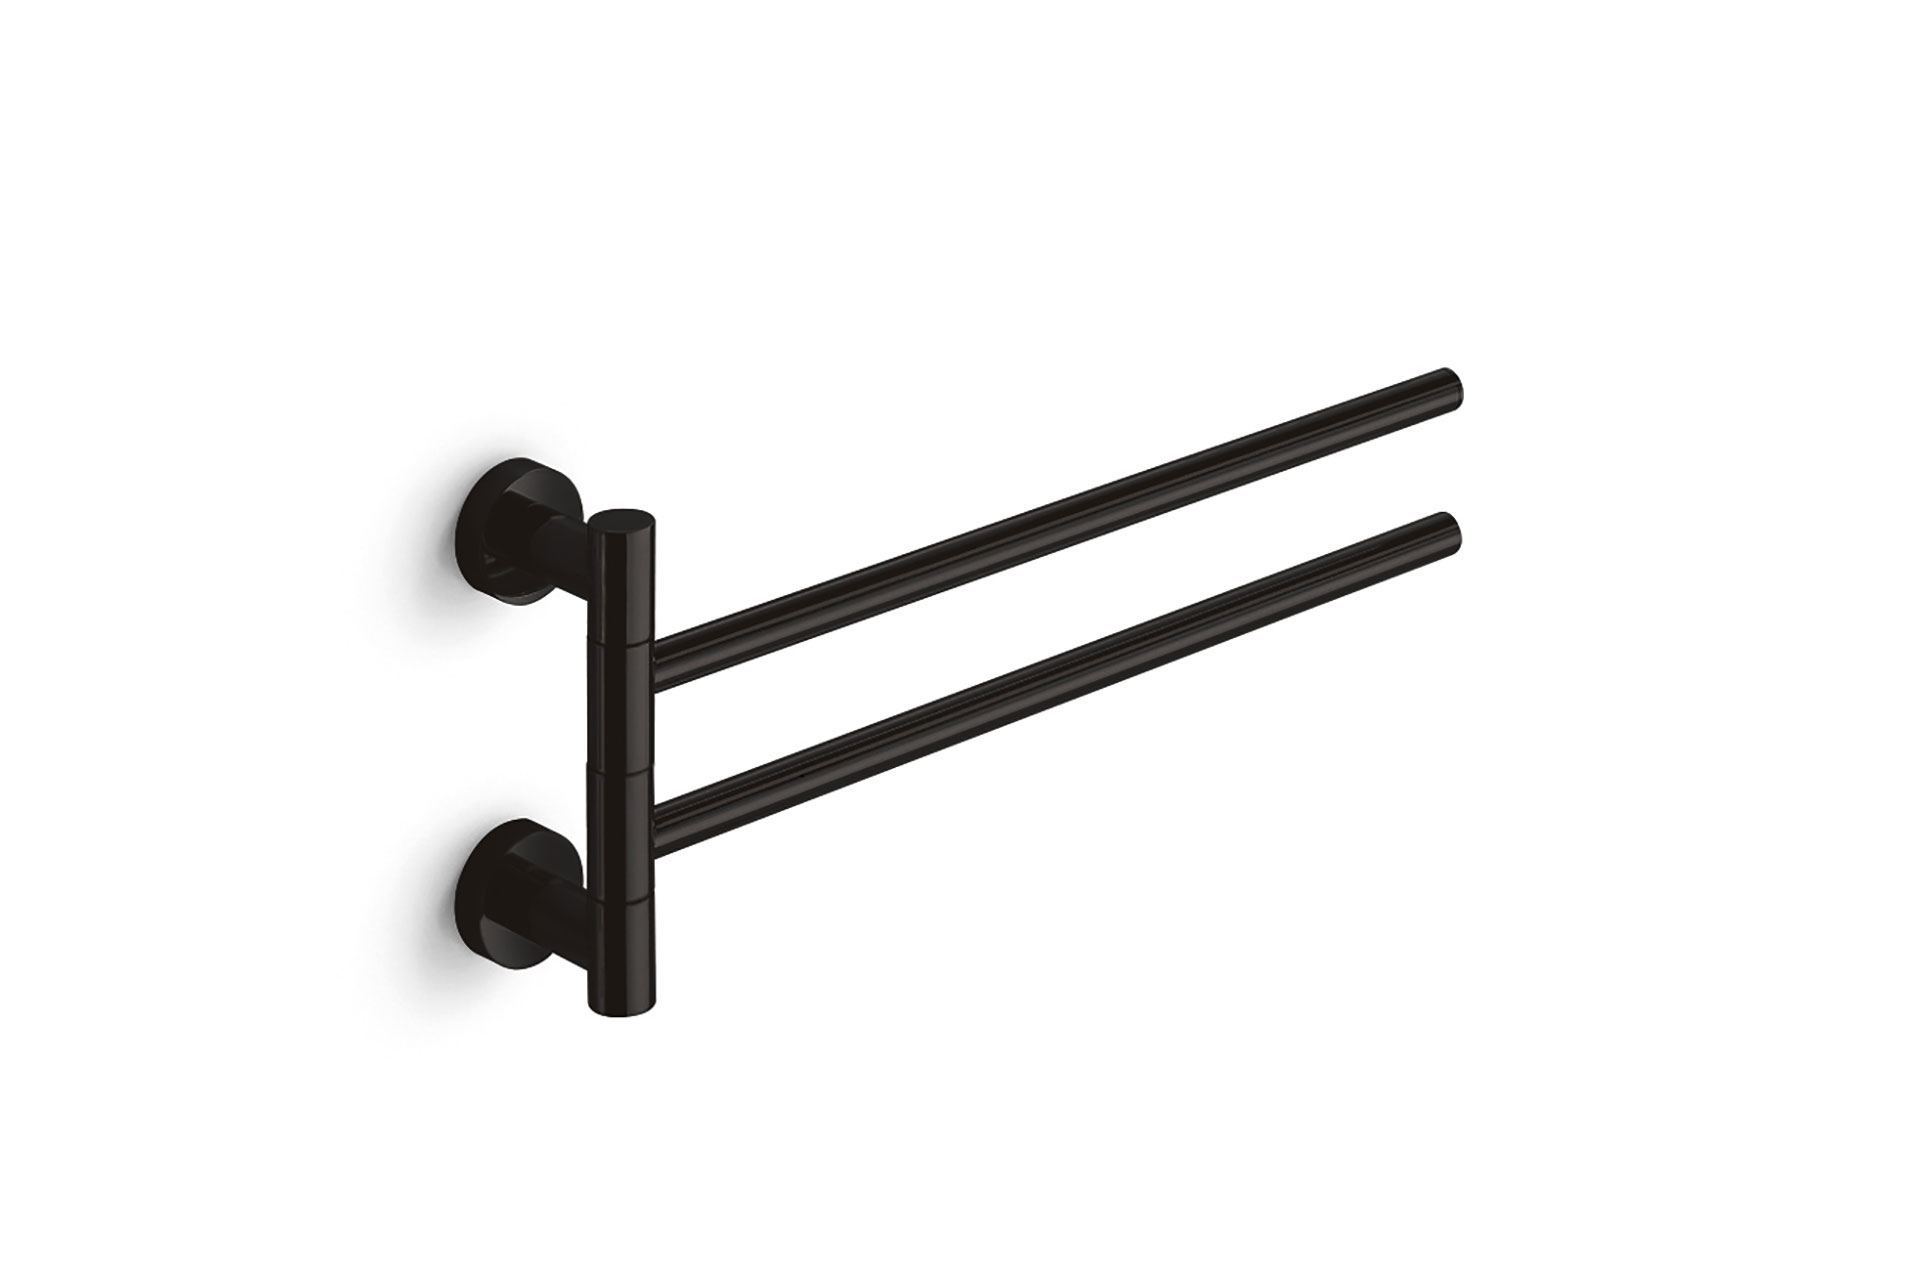 Double jointed towel rail